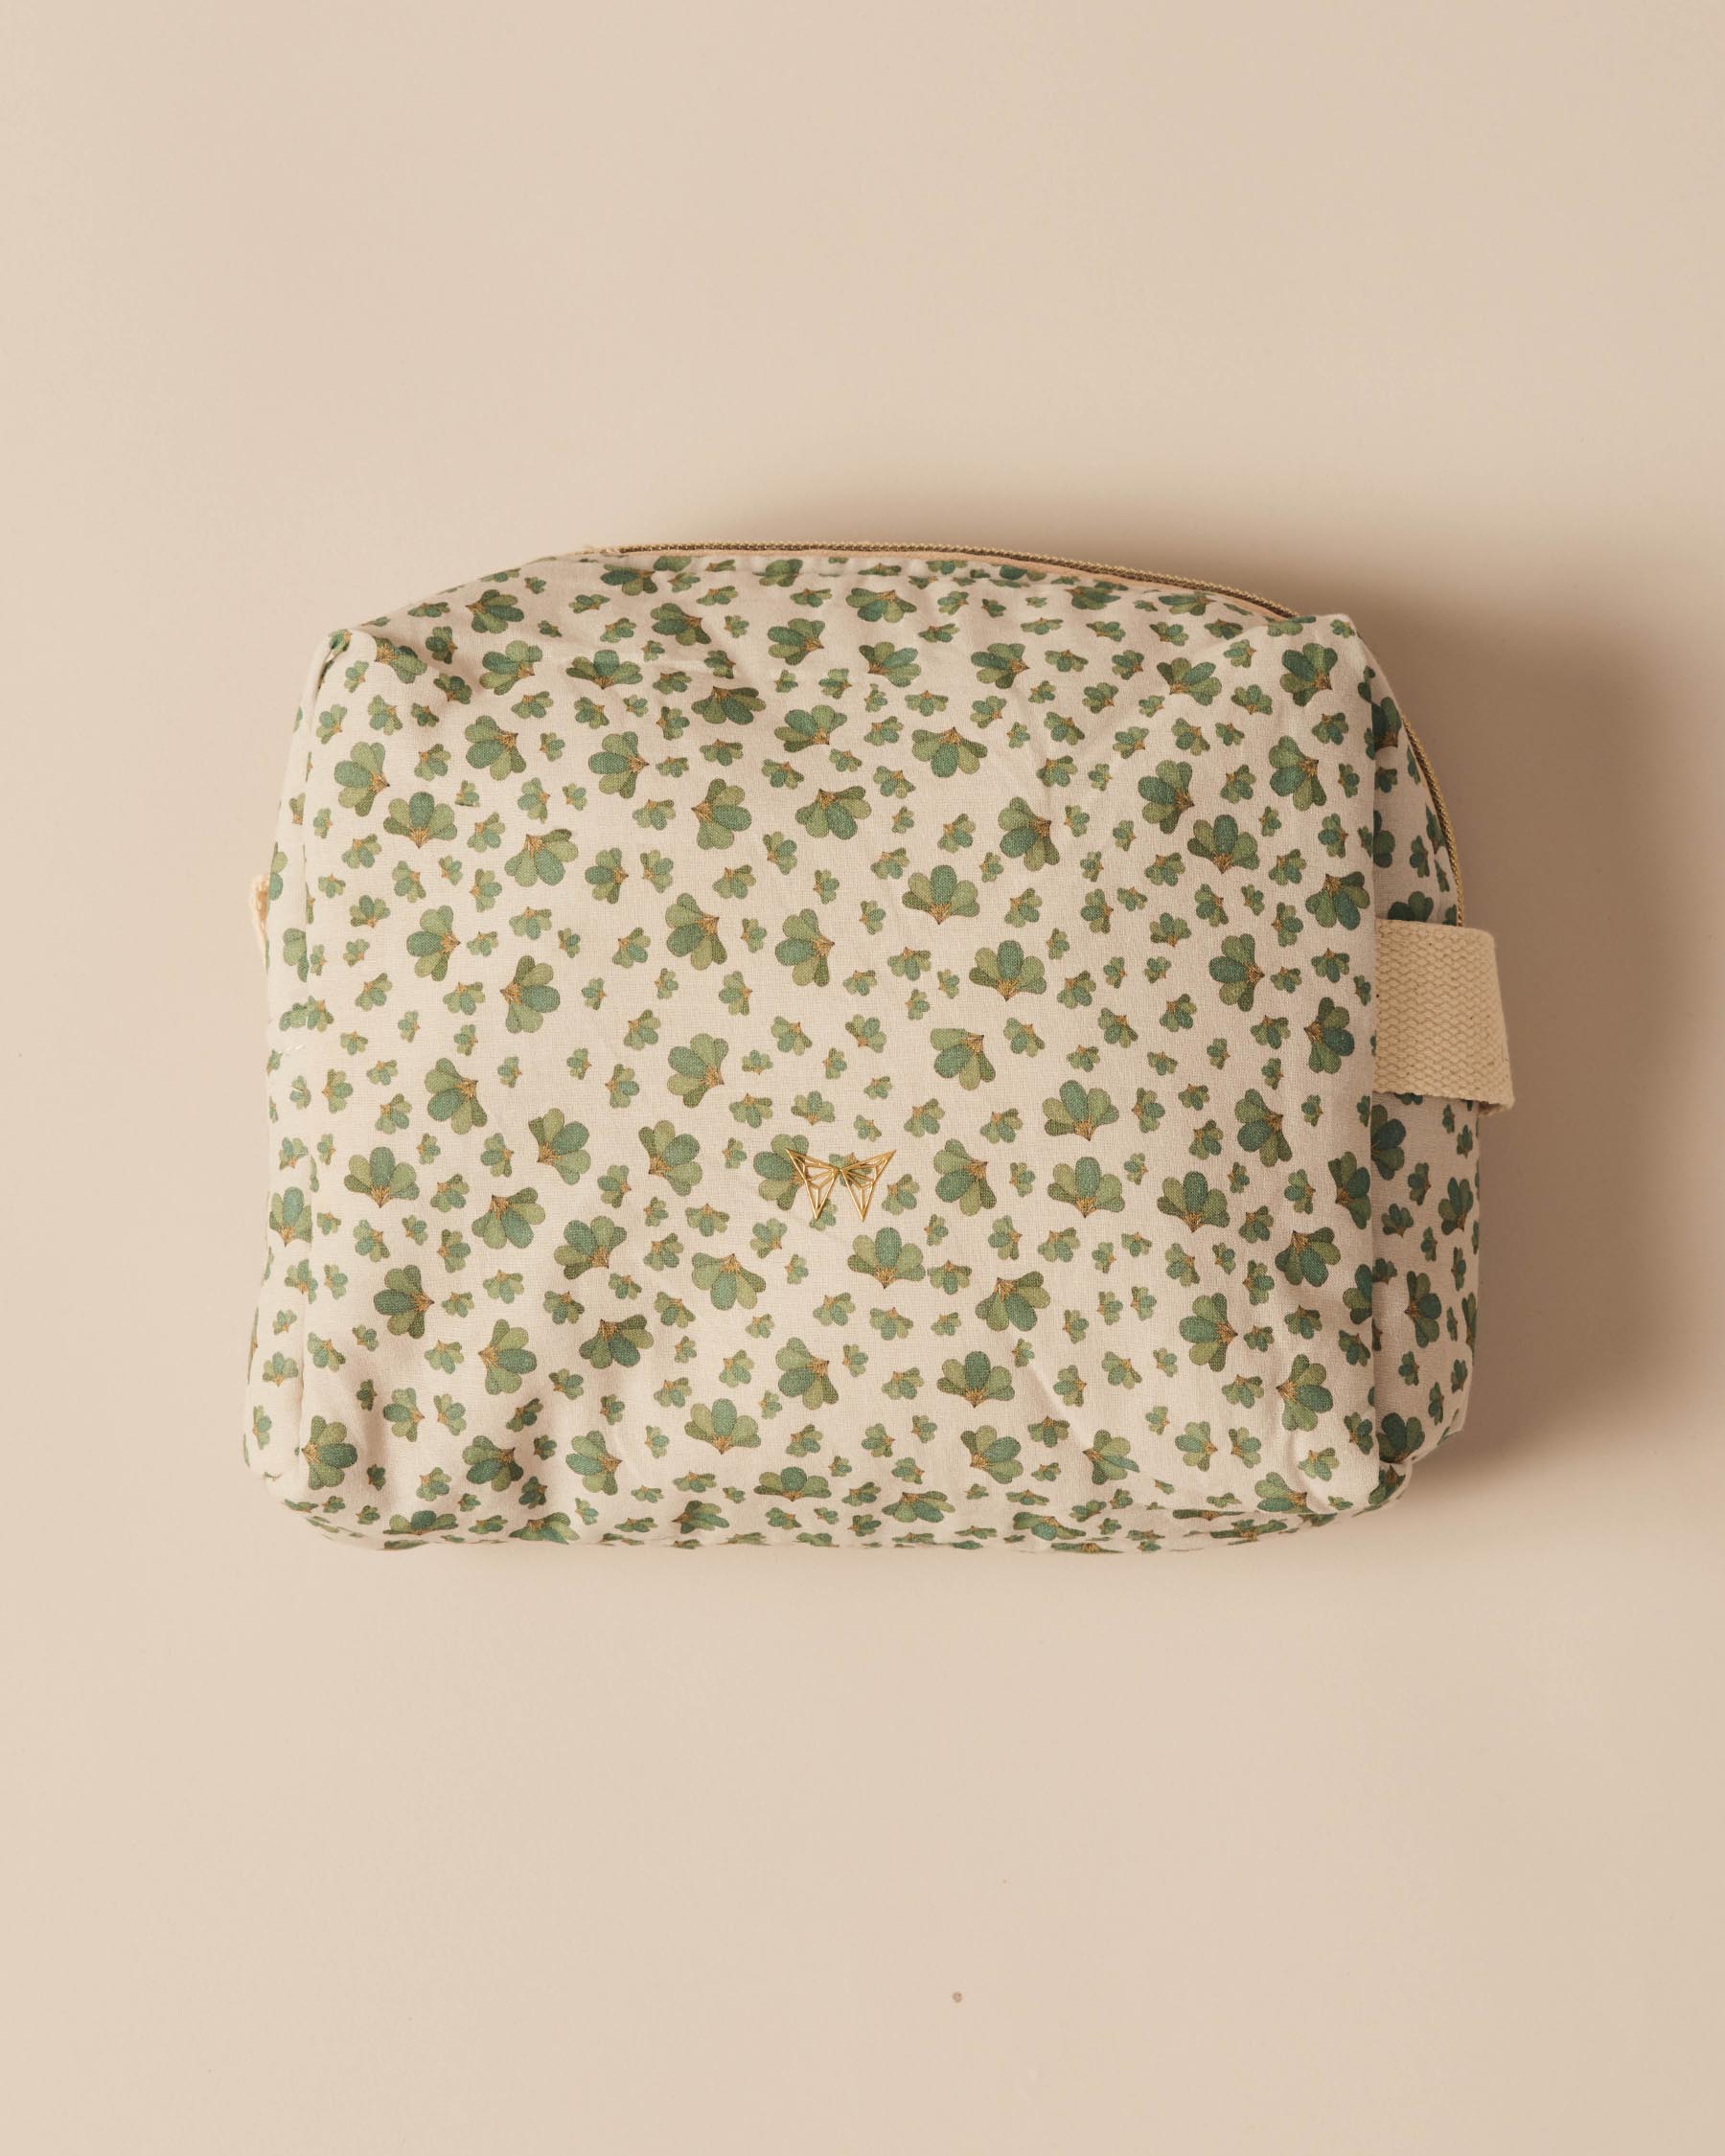 Green Flower toiletry bag | Limited edition